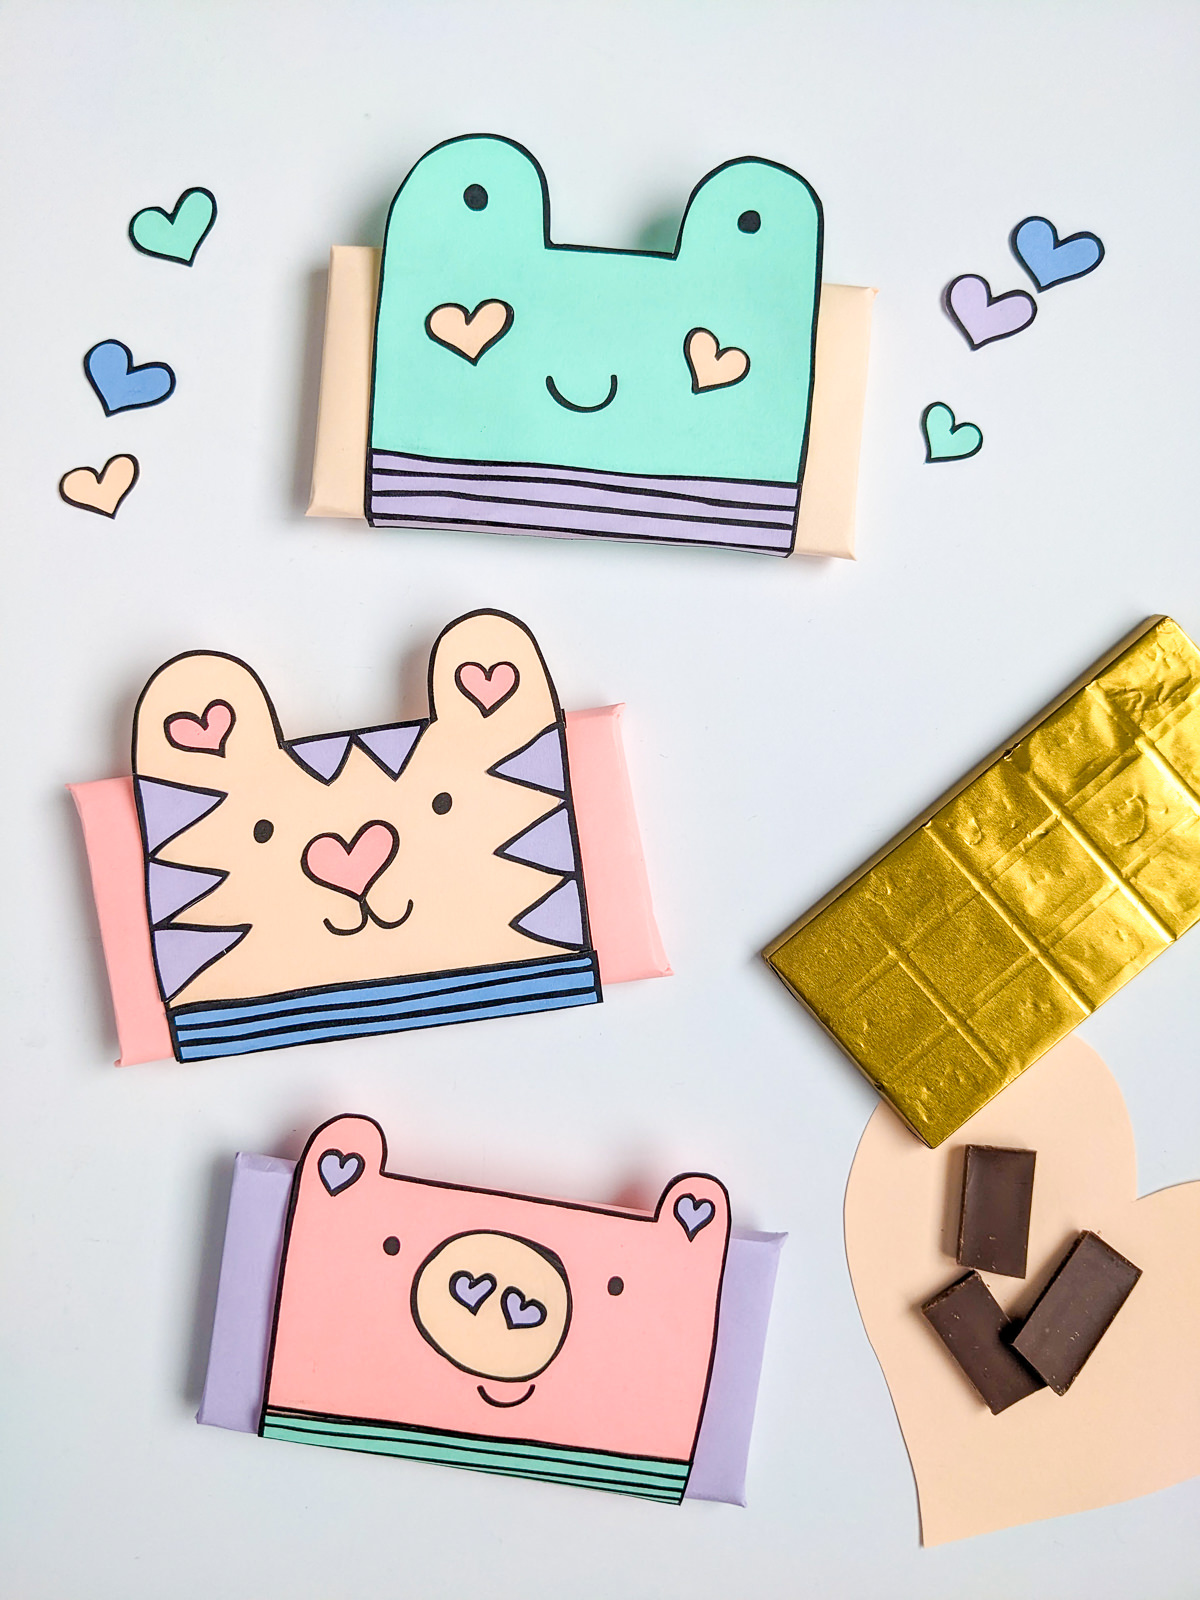 Toad, Tiger and Pig animal puns valentines DIY wrapped chocolate candy bars